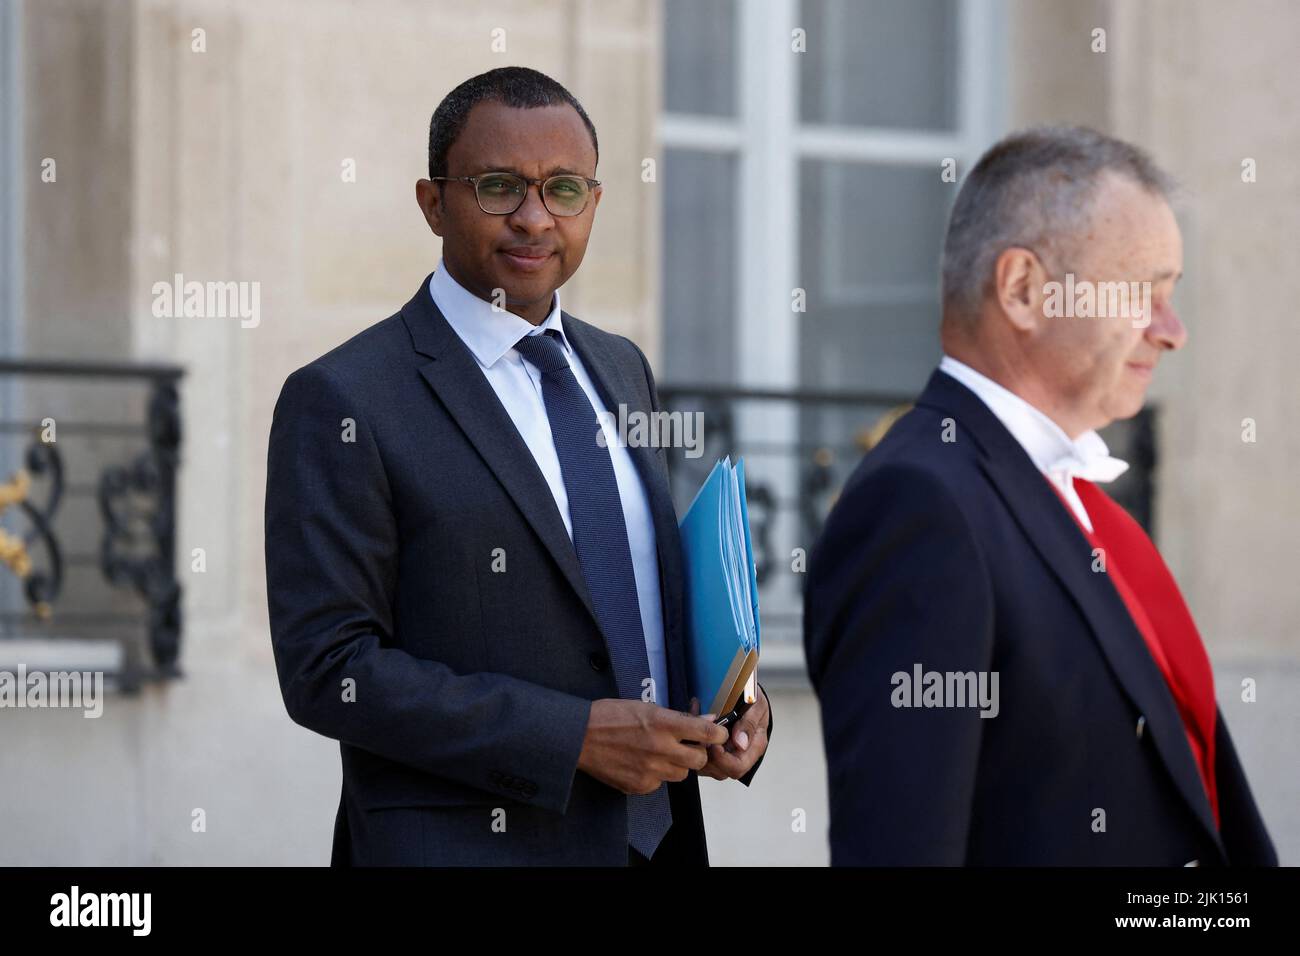 French Education and Youth Minister Pap Ndiaye leaves the Elysee Palace after the weekly cabinet meeting in Paris, France, July 29, 2022. REUTERS/Benoit Tessier Stock Photo